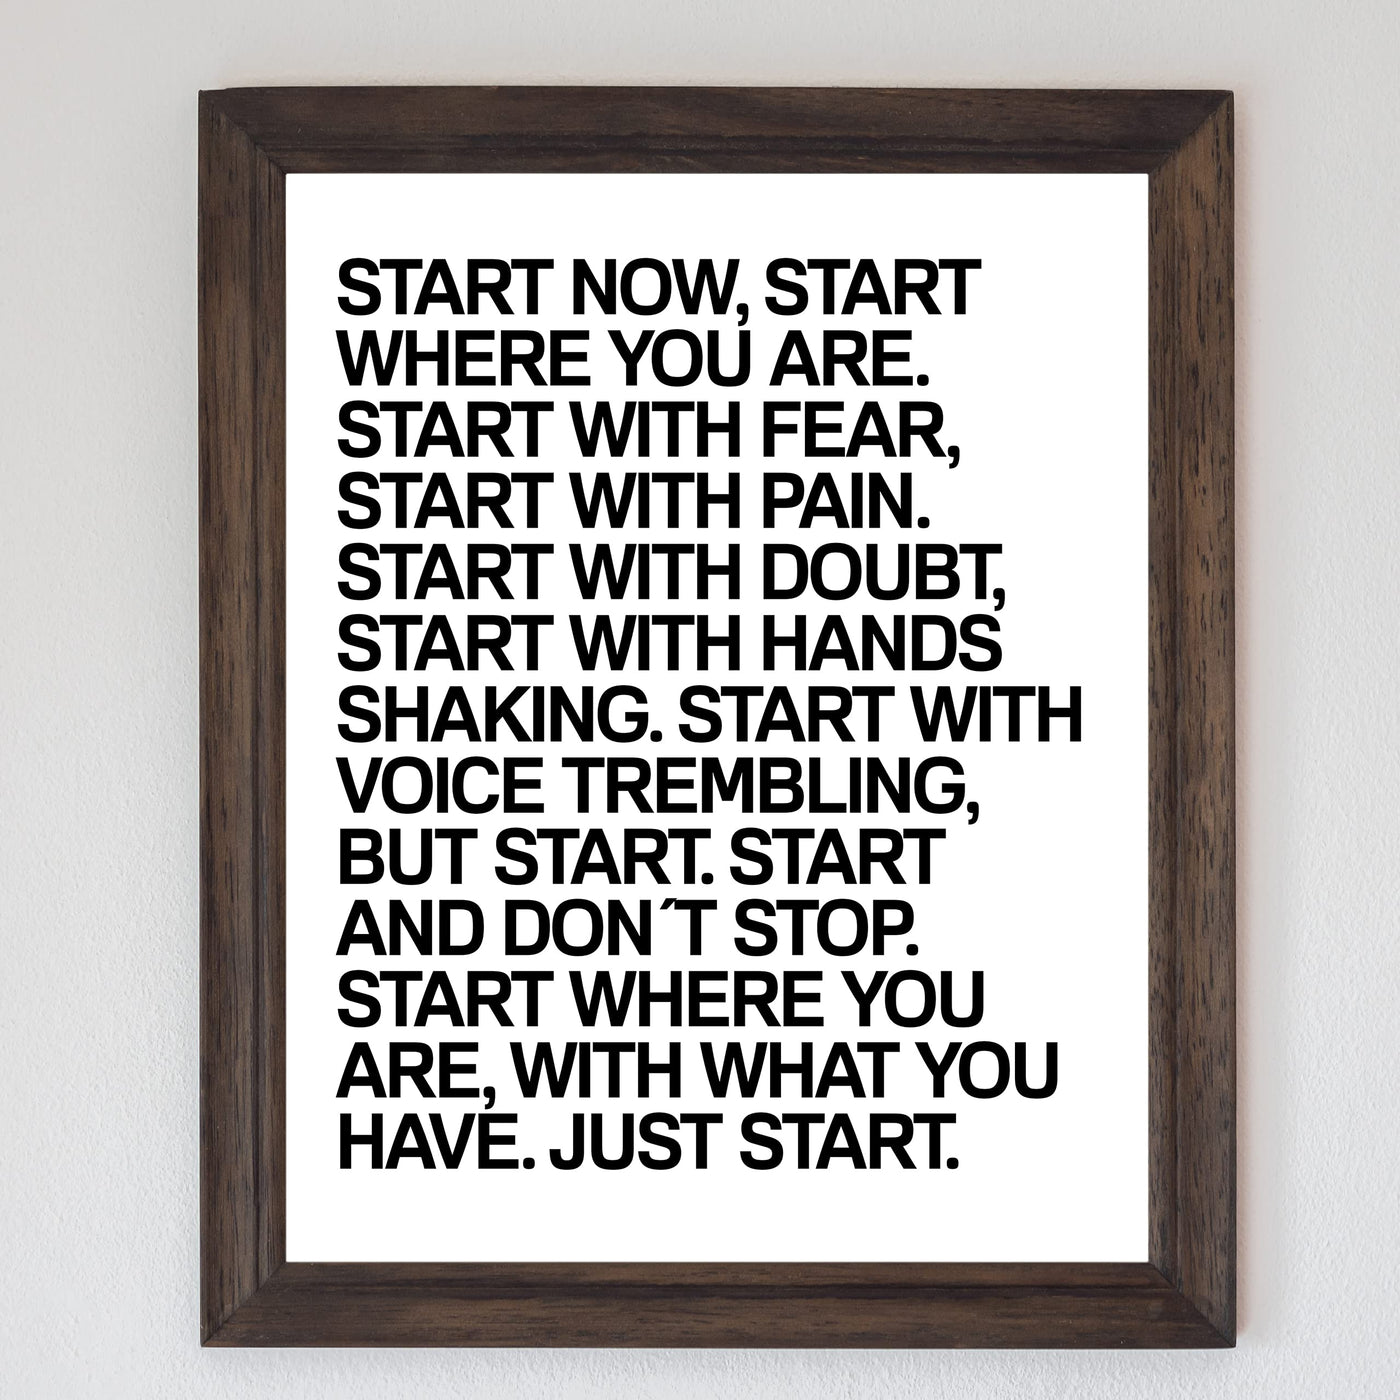 Start Now & Don't Stop Motivational Quotes Wall Decor-8 x 10" Inspirational Art Print-Ready to Frame. Modern Typographic Design. Perfect Home-Office-Desk-School-Gym Decor! Great Gift of Motivation!